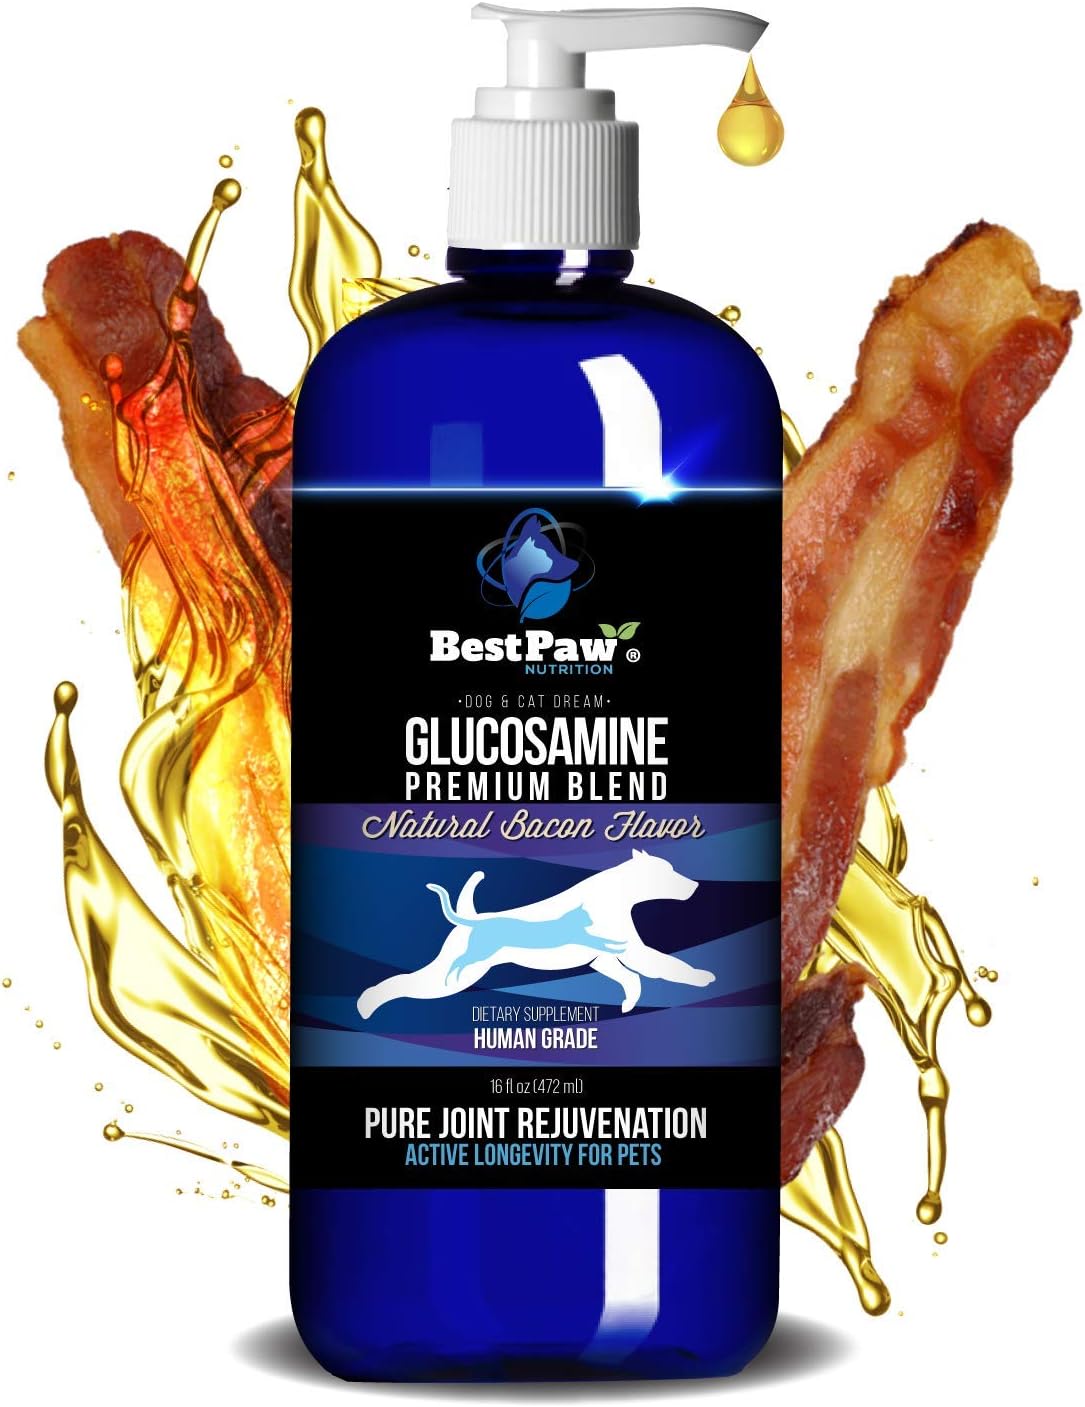 Best Paw Nutrition - Bacon Flavor Liquid Glucosamine for Dogs & Cats - Chondroitin, MSM, Hyaluronic Acid - Dog Arthritis Home Remedy - Joint Supplement for Hip & Joint Pain Relief Pets Love - 16oz